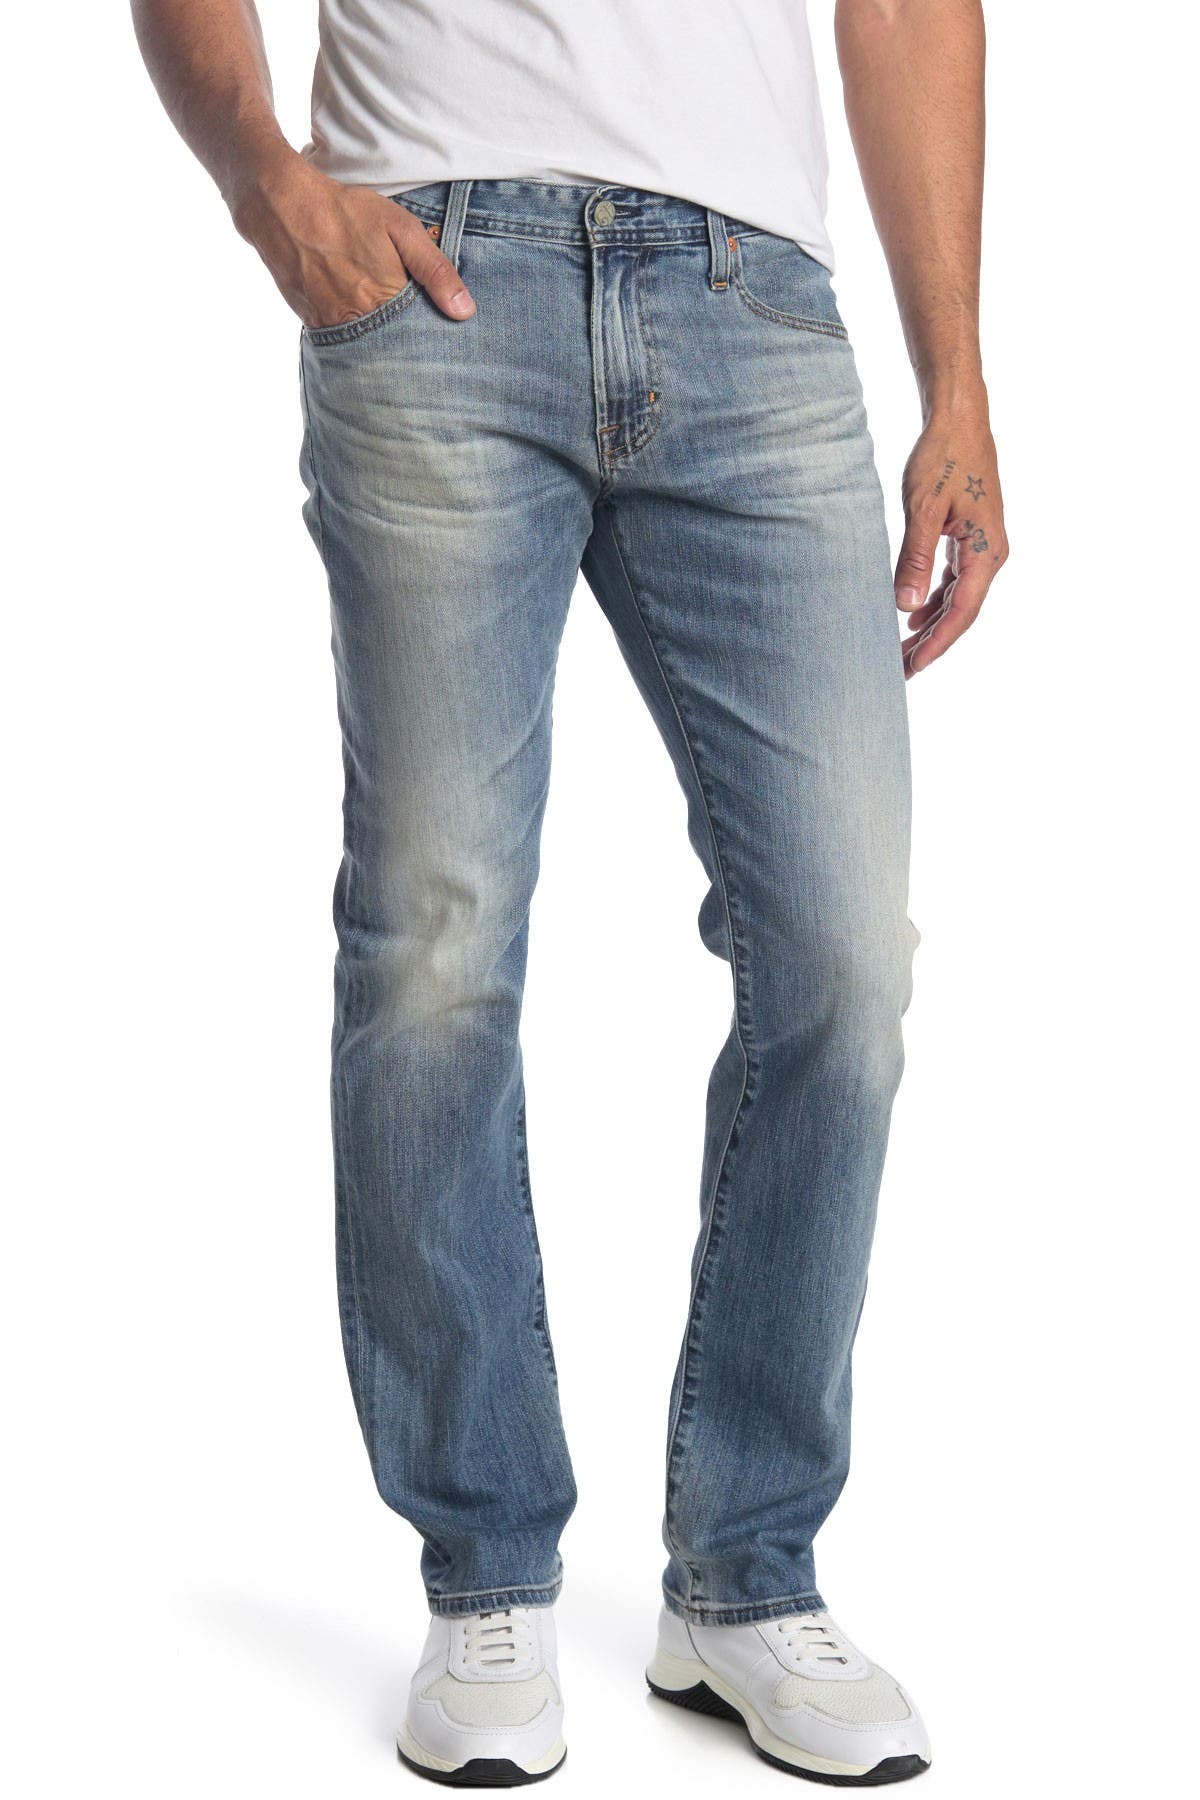 Ag Matchbox Straight Leg Jeans In 21 Years Seize | ModeSens